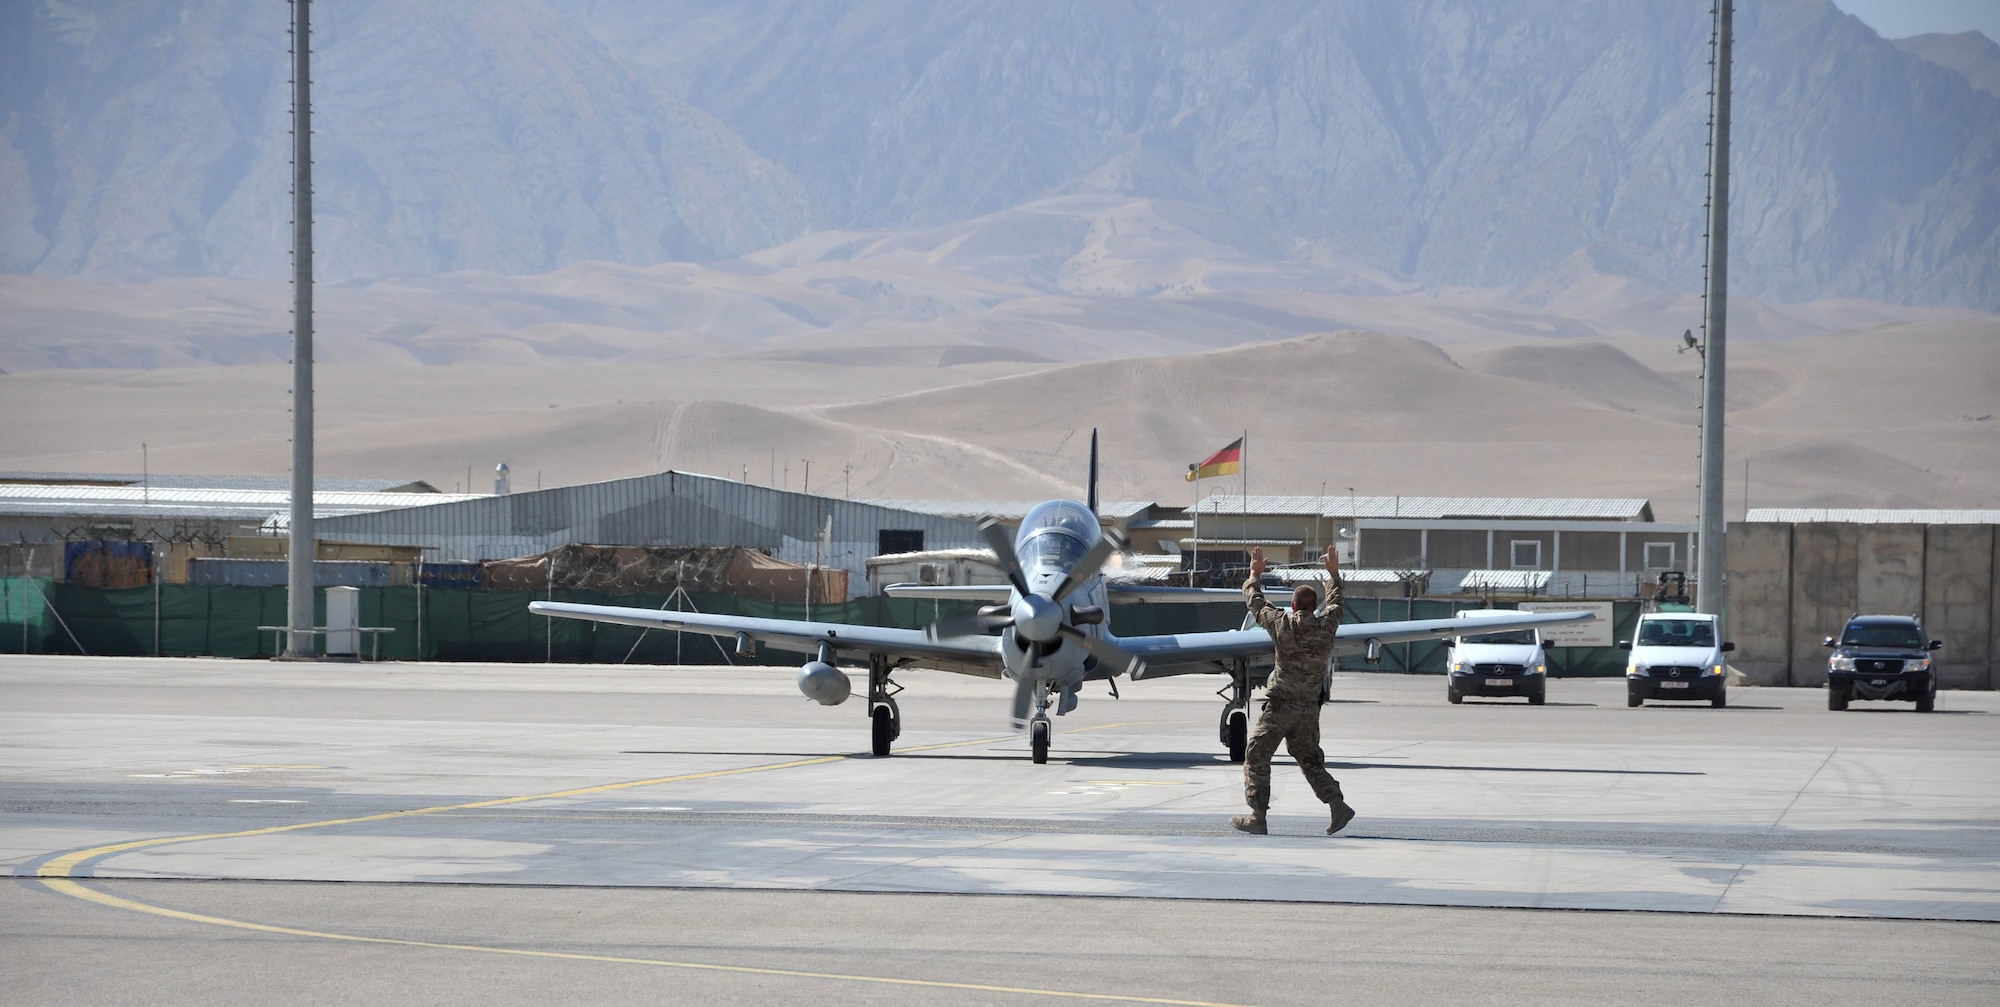 Brig. Gen. David Hicks, 438th Air Expeditionary Wing and Train, Advise, Assist Command – Air (TAAC-Air) commander, taxis an A-29 Super Tucano at Mazar-e-Sharif, Afghanistan, July 21, 2016. Hicks and Afghan Air Force Commander Lt. Gen. Abdul Wahab visited multiple leaders during a visit to the TAAC-North Headquarters. (U.S. Air Force photo by Capt. Jason Smith) 